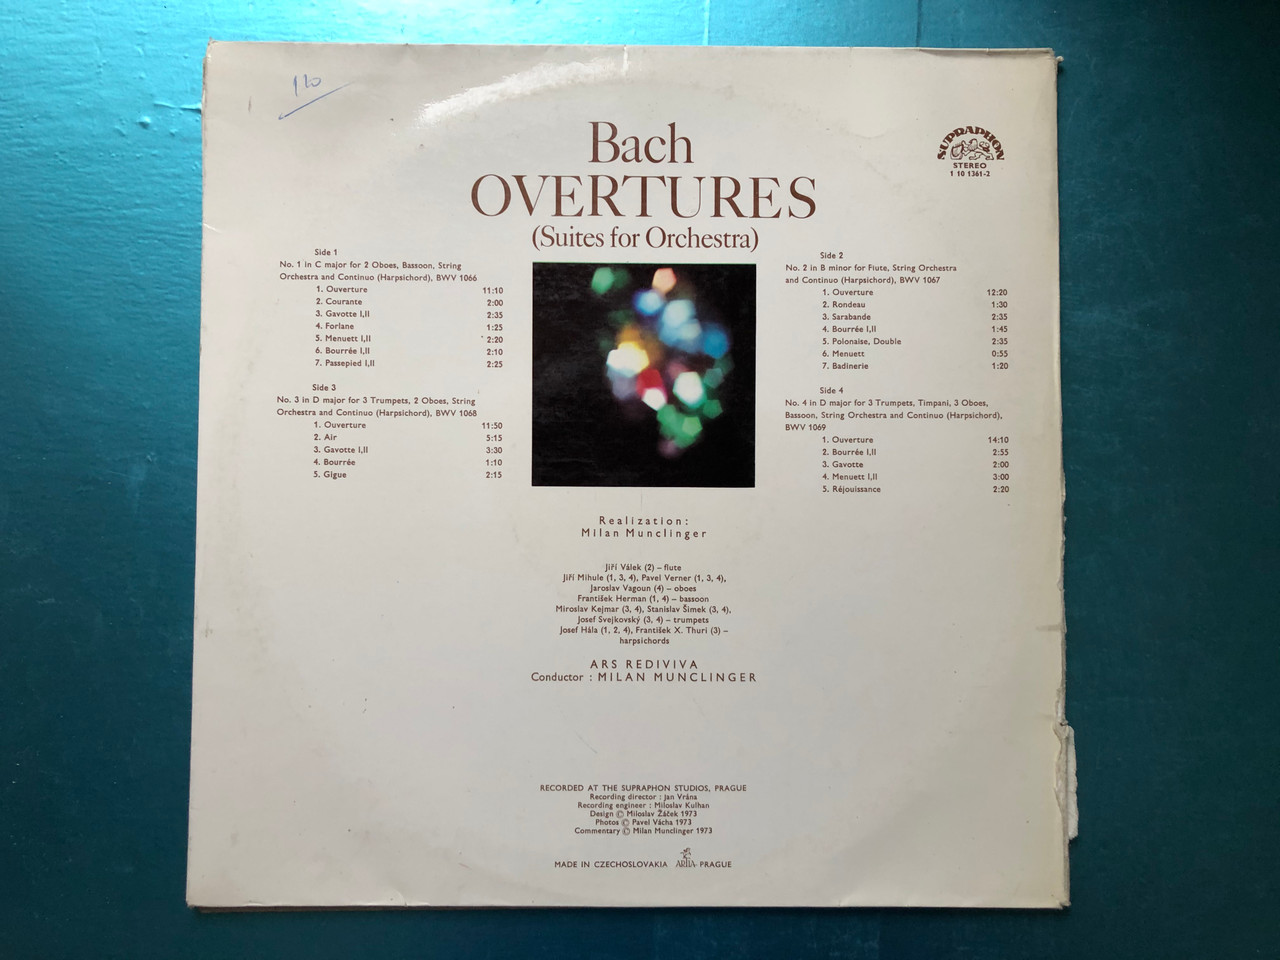 https://cdn10.bigcommerce.com/s-62bdpkt7pb/products/30482/images/180249/Bach_-_Overtures_Suites_For_Orchestra_Ars_Rediviva_Milan_Munclinger_cond._Supraphon_2x_LP_1973_Stereo_1_10_1361-2_2__87363.1622792513.1280.1280.JPG?c=2&_ga=2.170983590.700277554.1623167661-252145610.1623167661